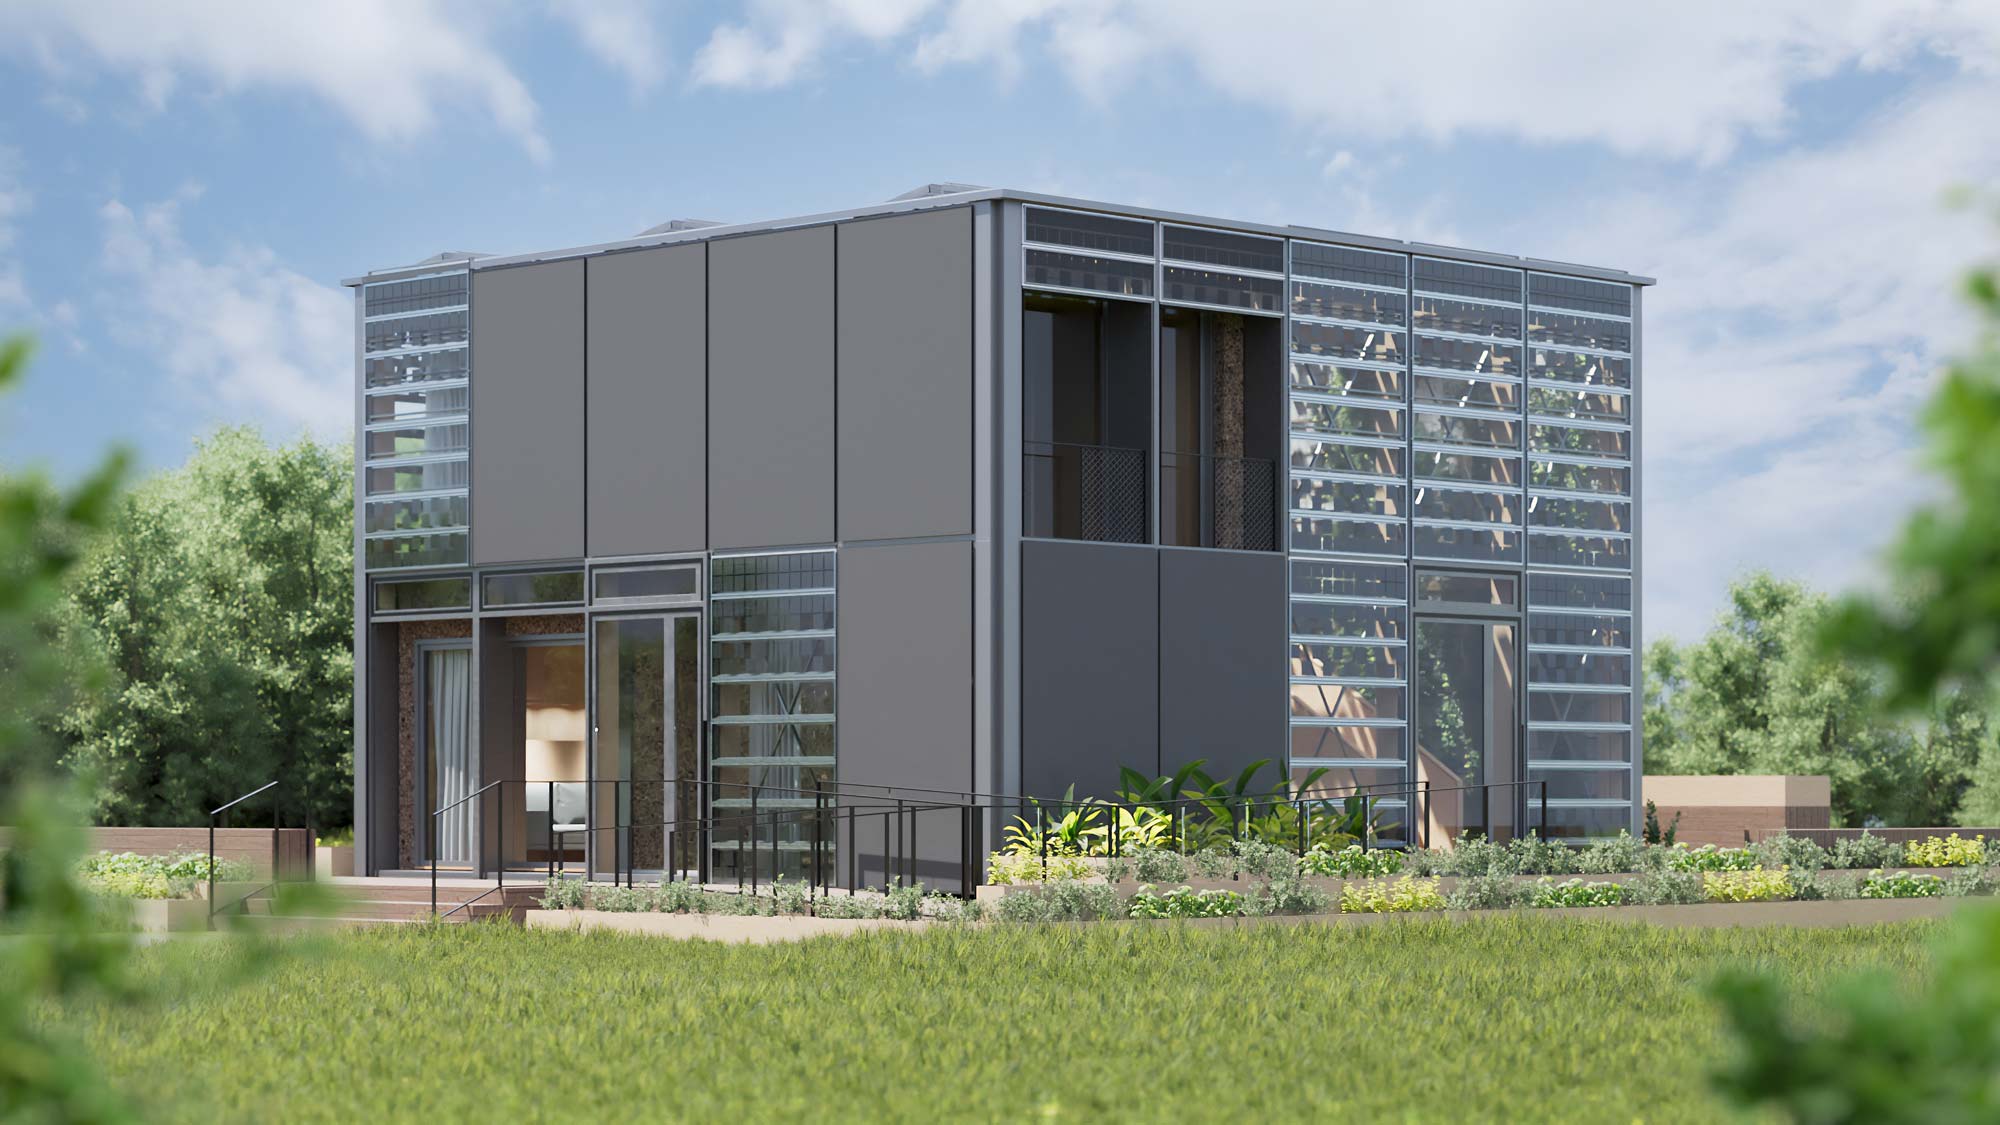 Exterior view of the HDU from Team MIMO for the Solar Decathlon Europe 21/22 in Wuppertal, Germany.